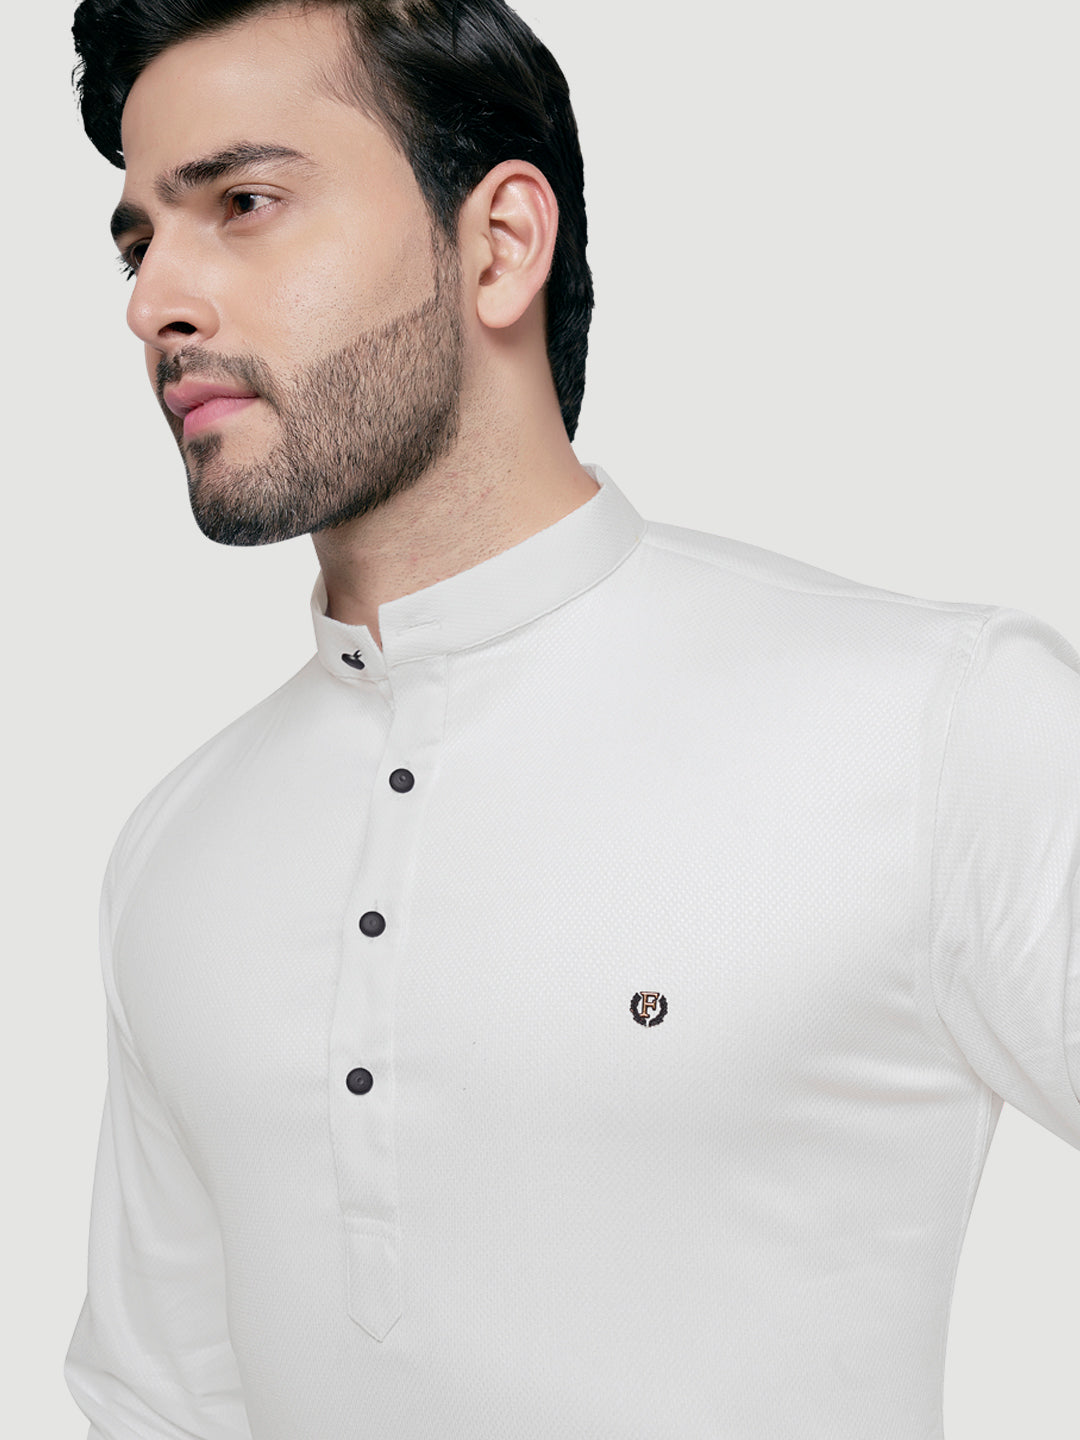 Black and White Men's Designer Shirt with Collar Accessory & Broach-18